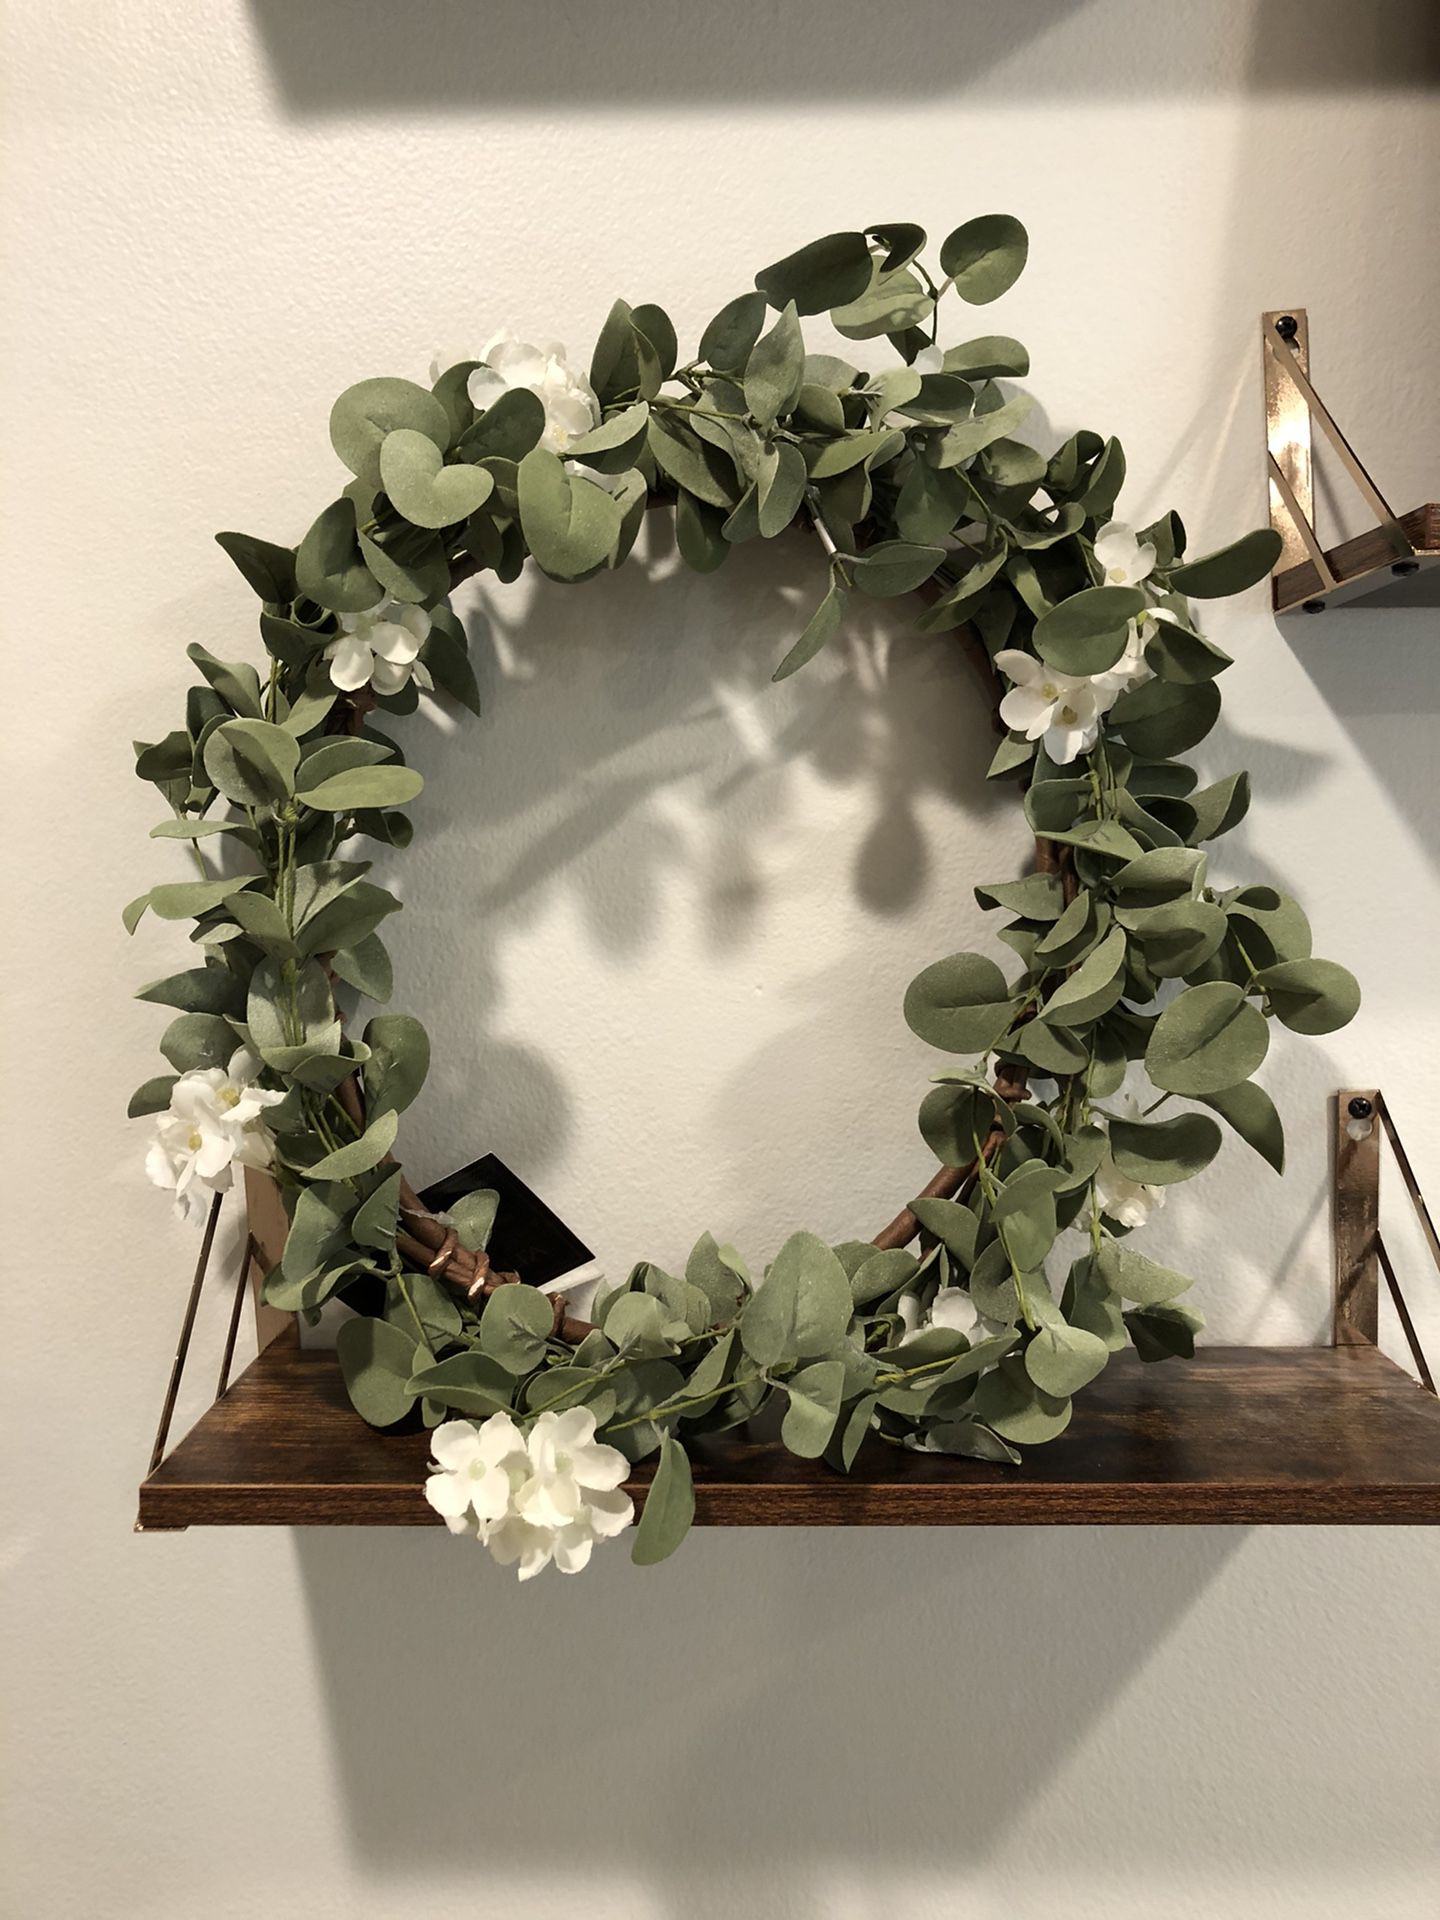 Home Decor - Faux Summer Wreaths with Flowers Wedding Decor